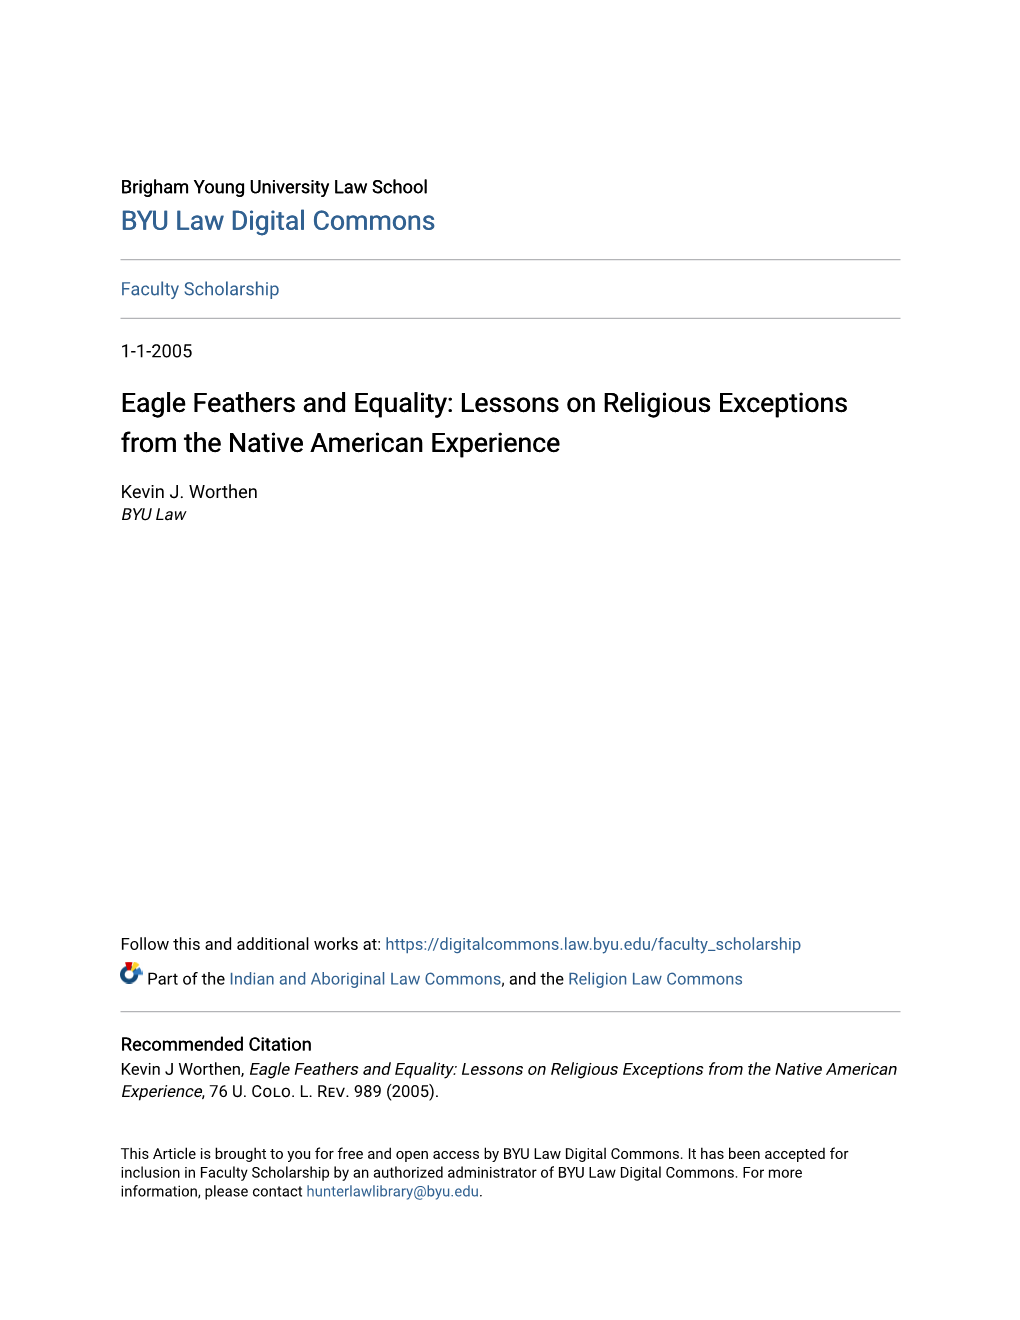 Eagle Feathers and Equality: Lessons on Religious Exceptions from the Native American Experience